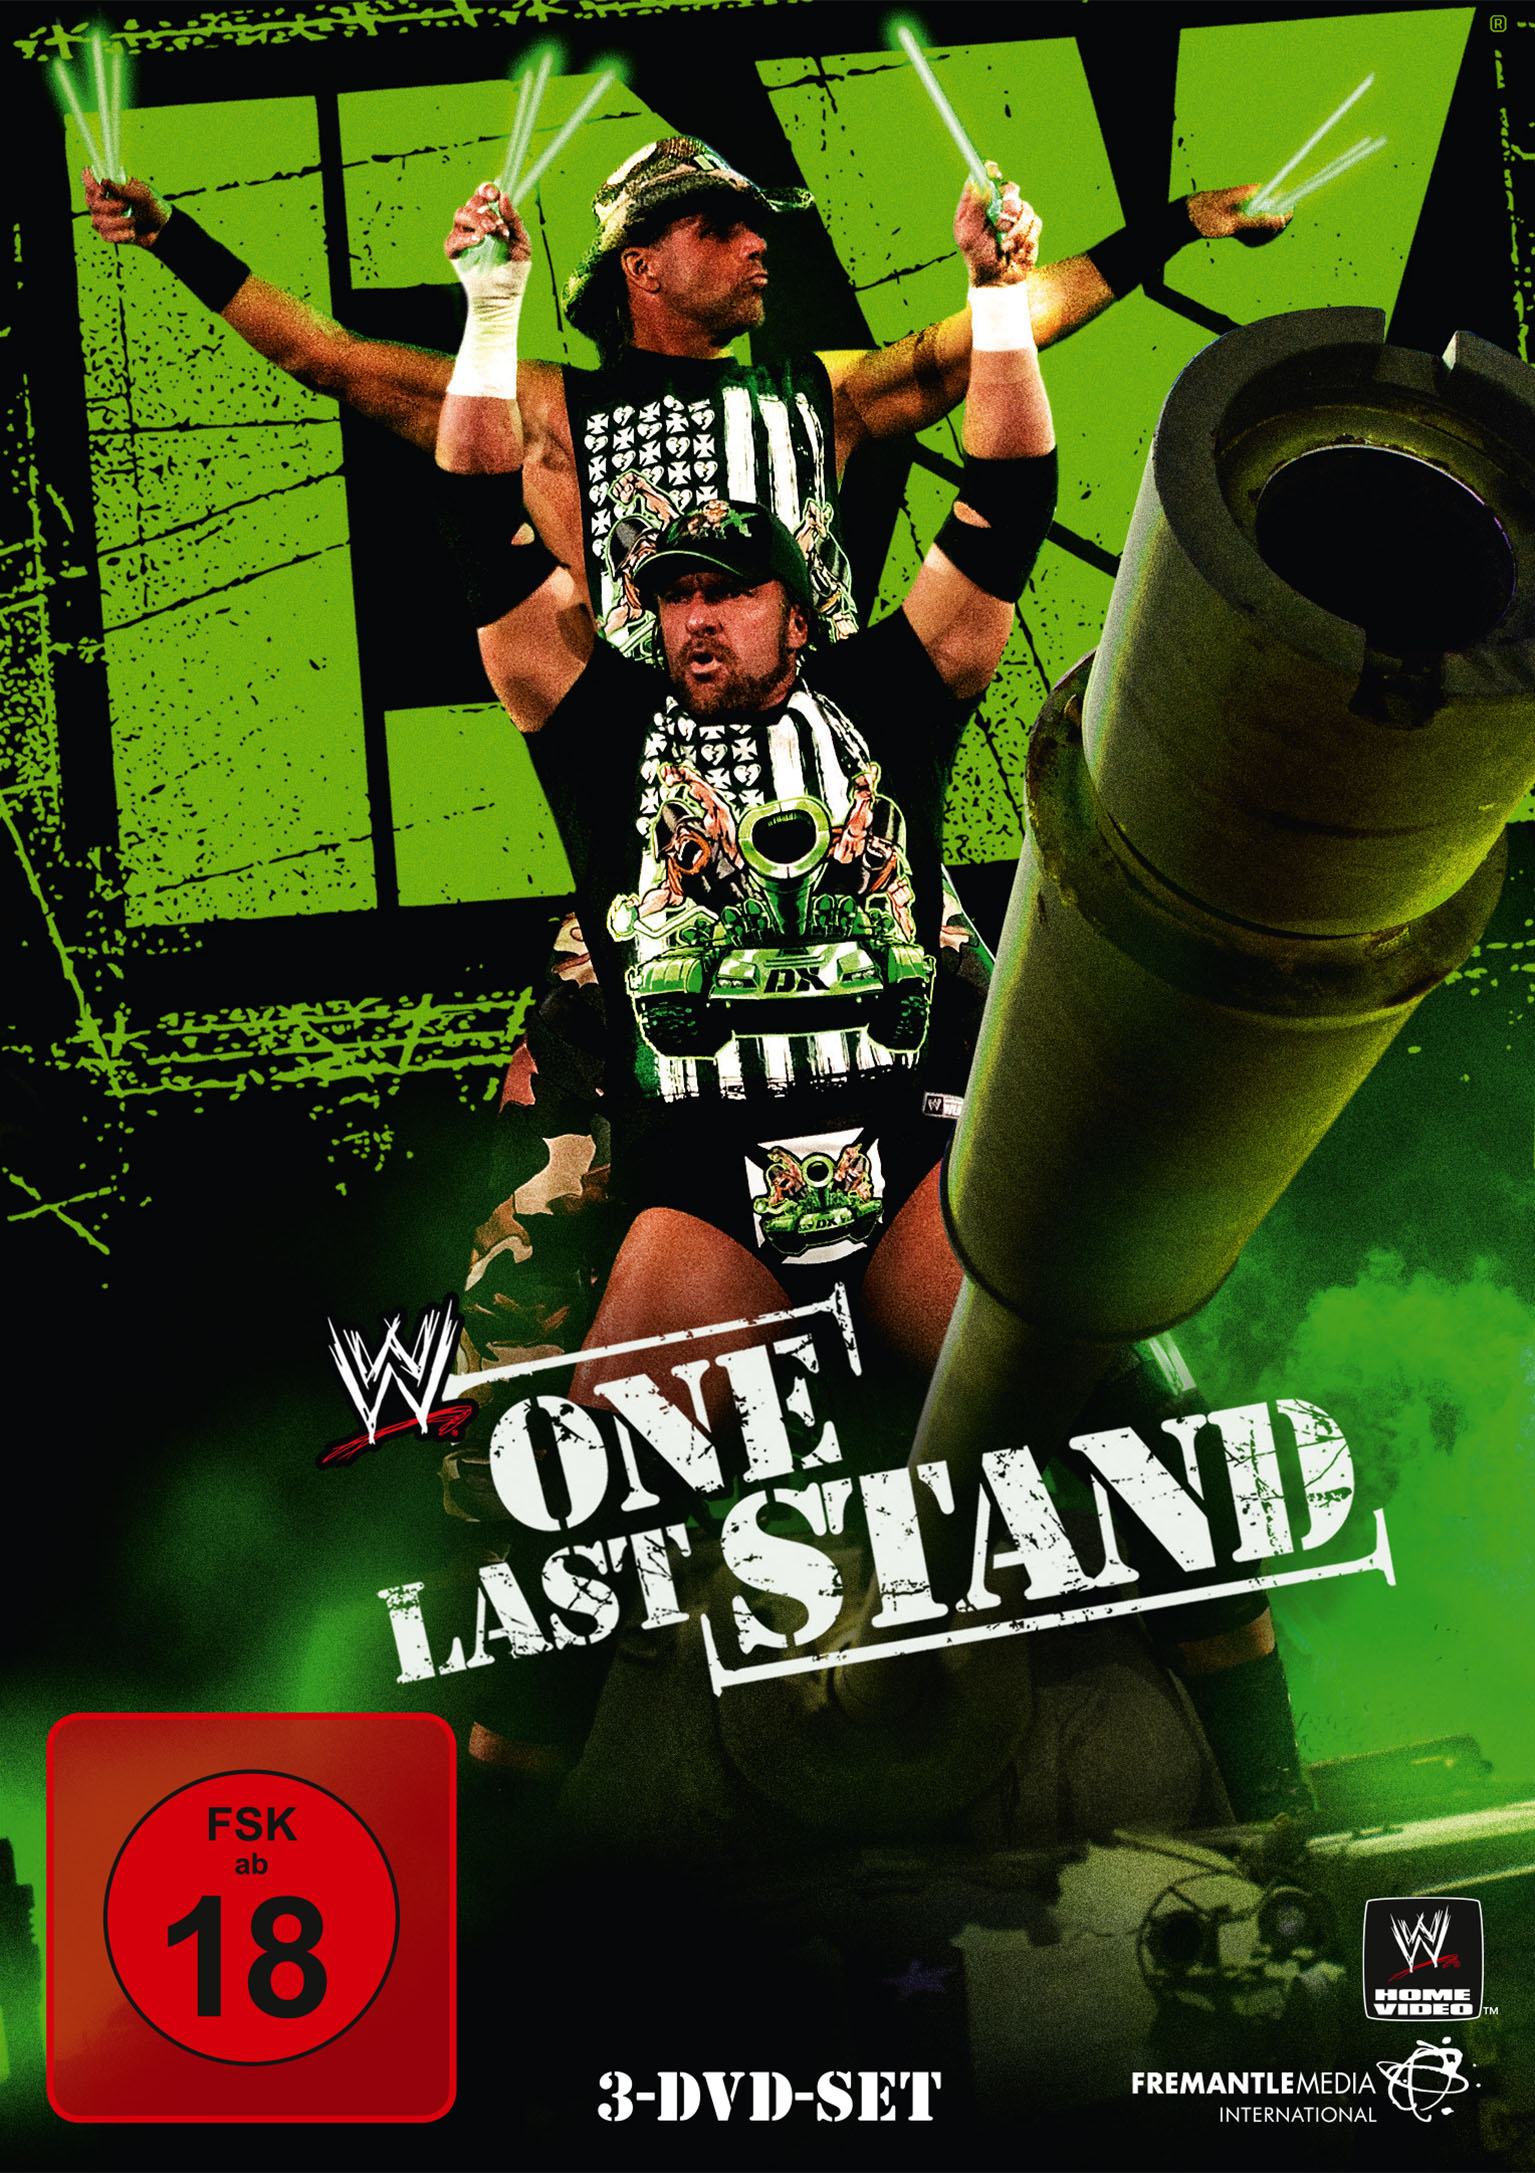 DX - One Last Stand DVD